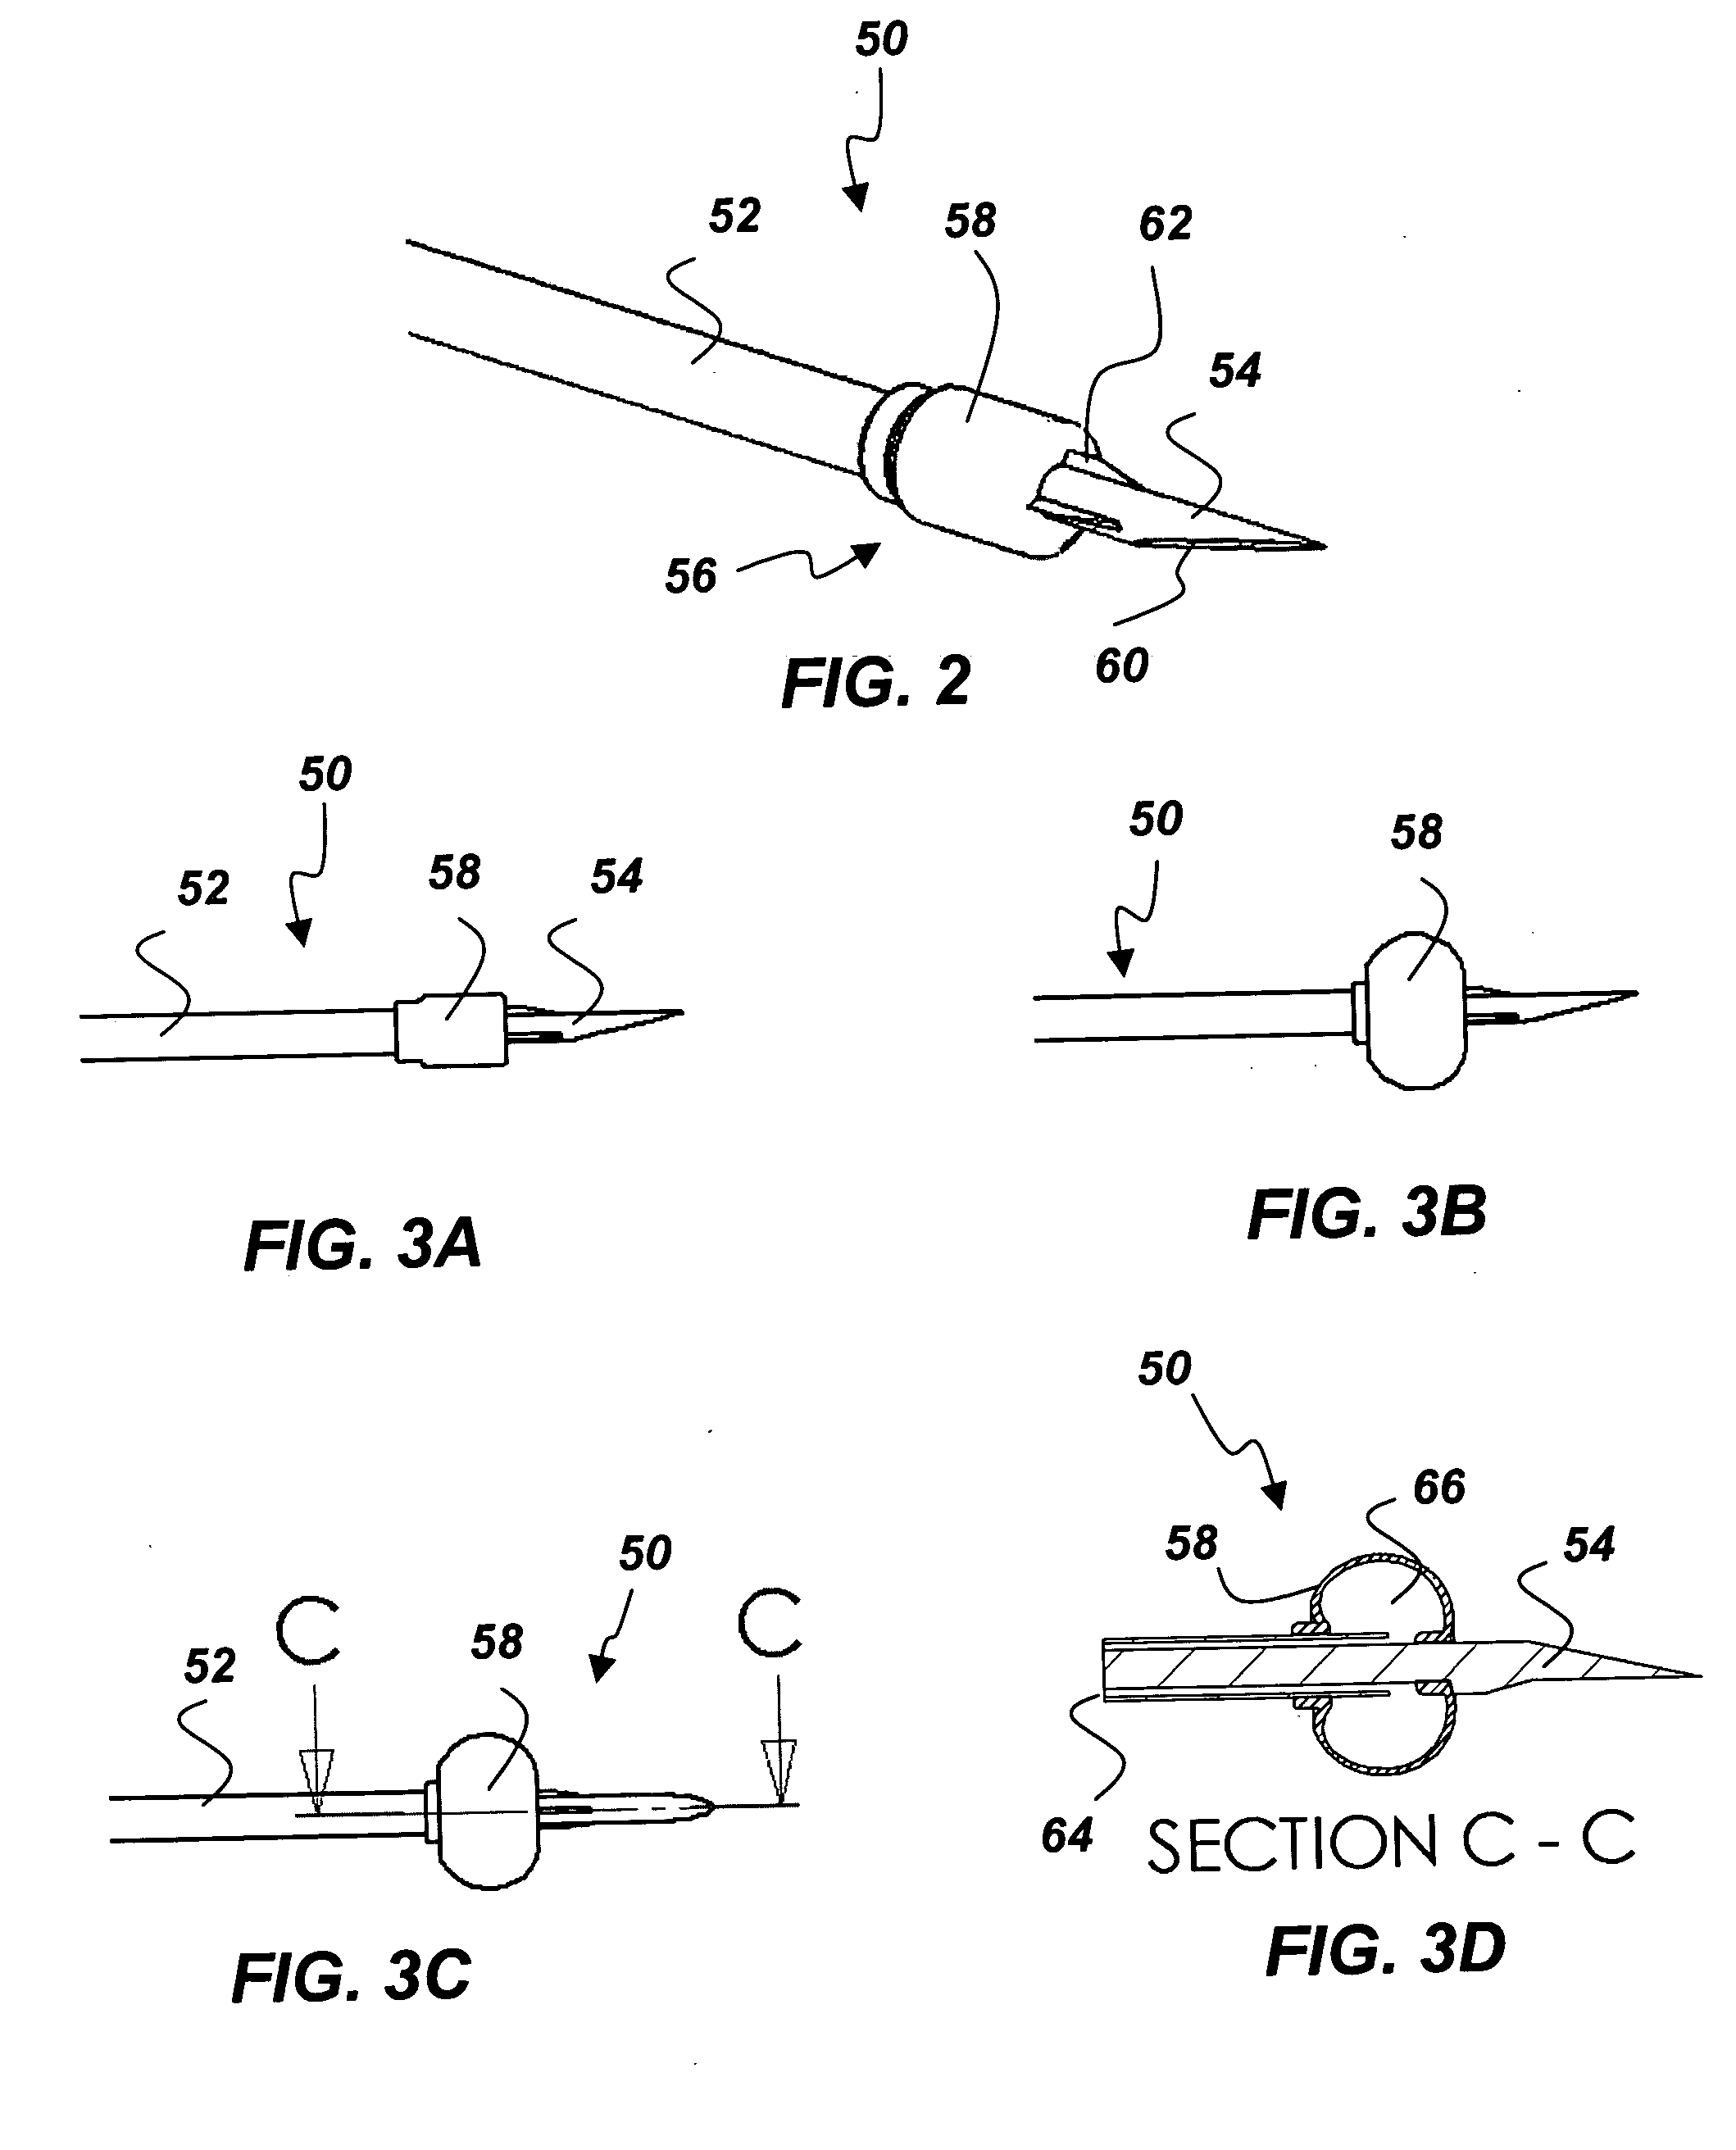 Mechanisms and methods used in the anastomosis of biological conduits